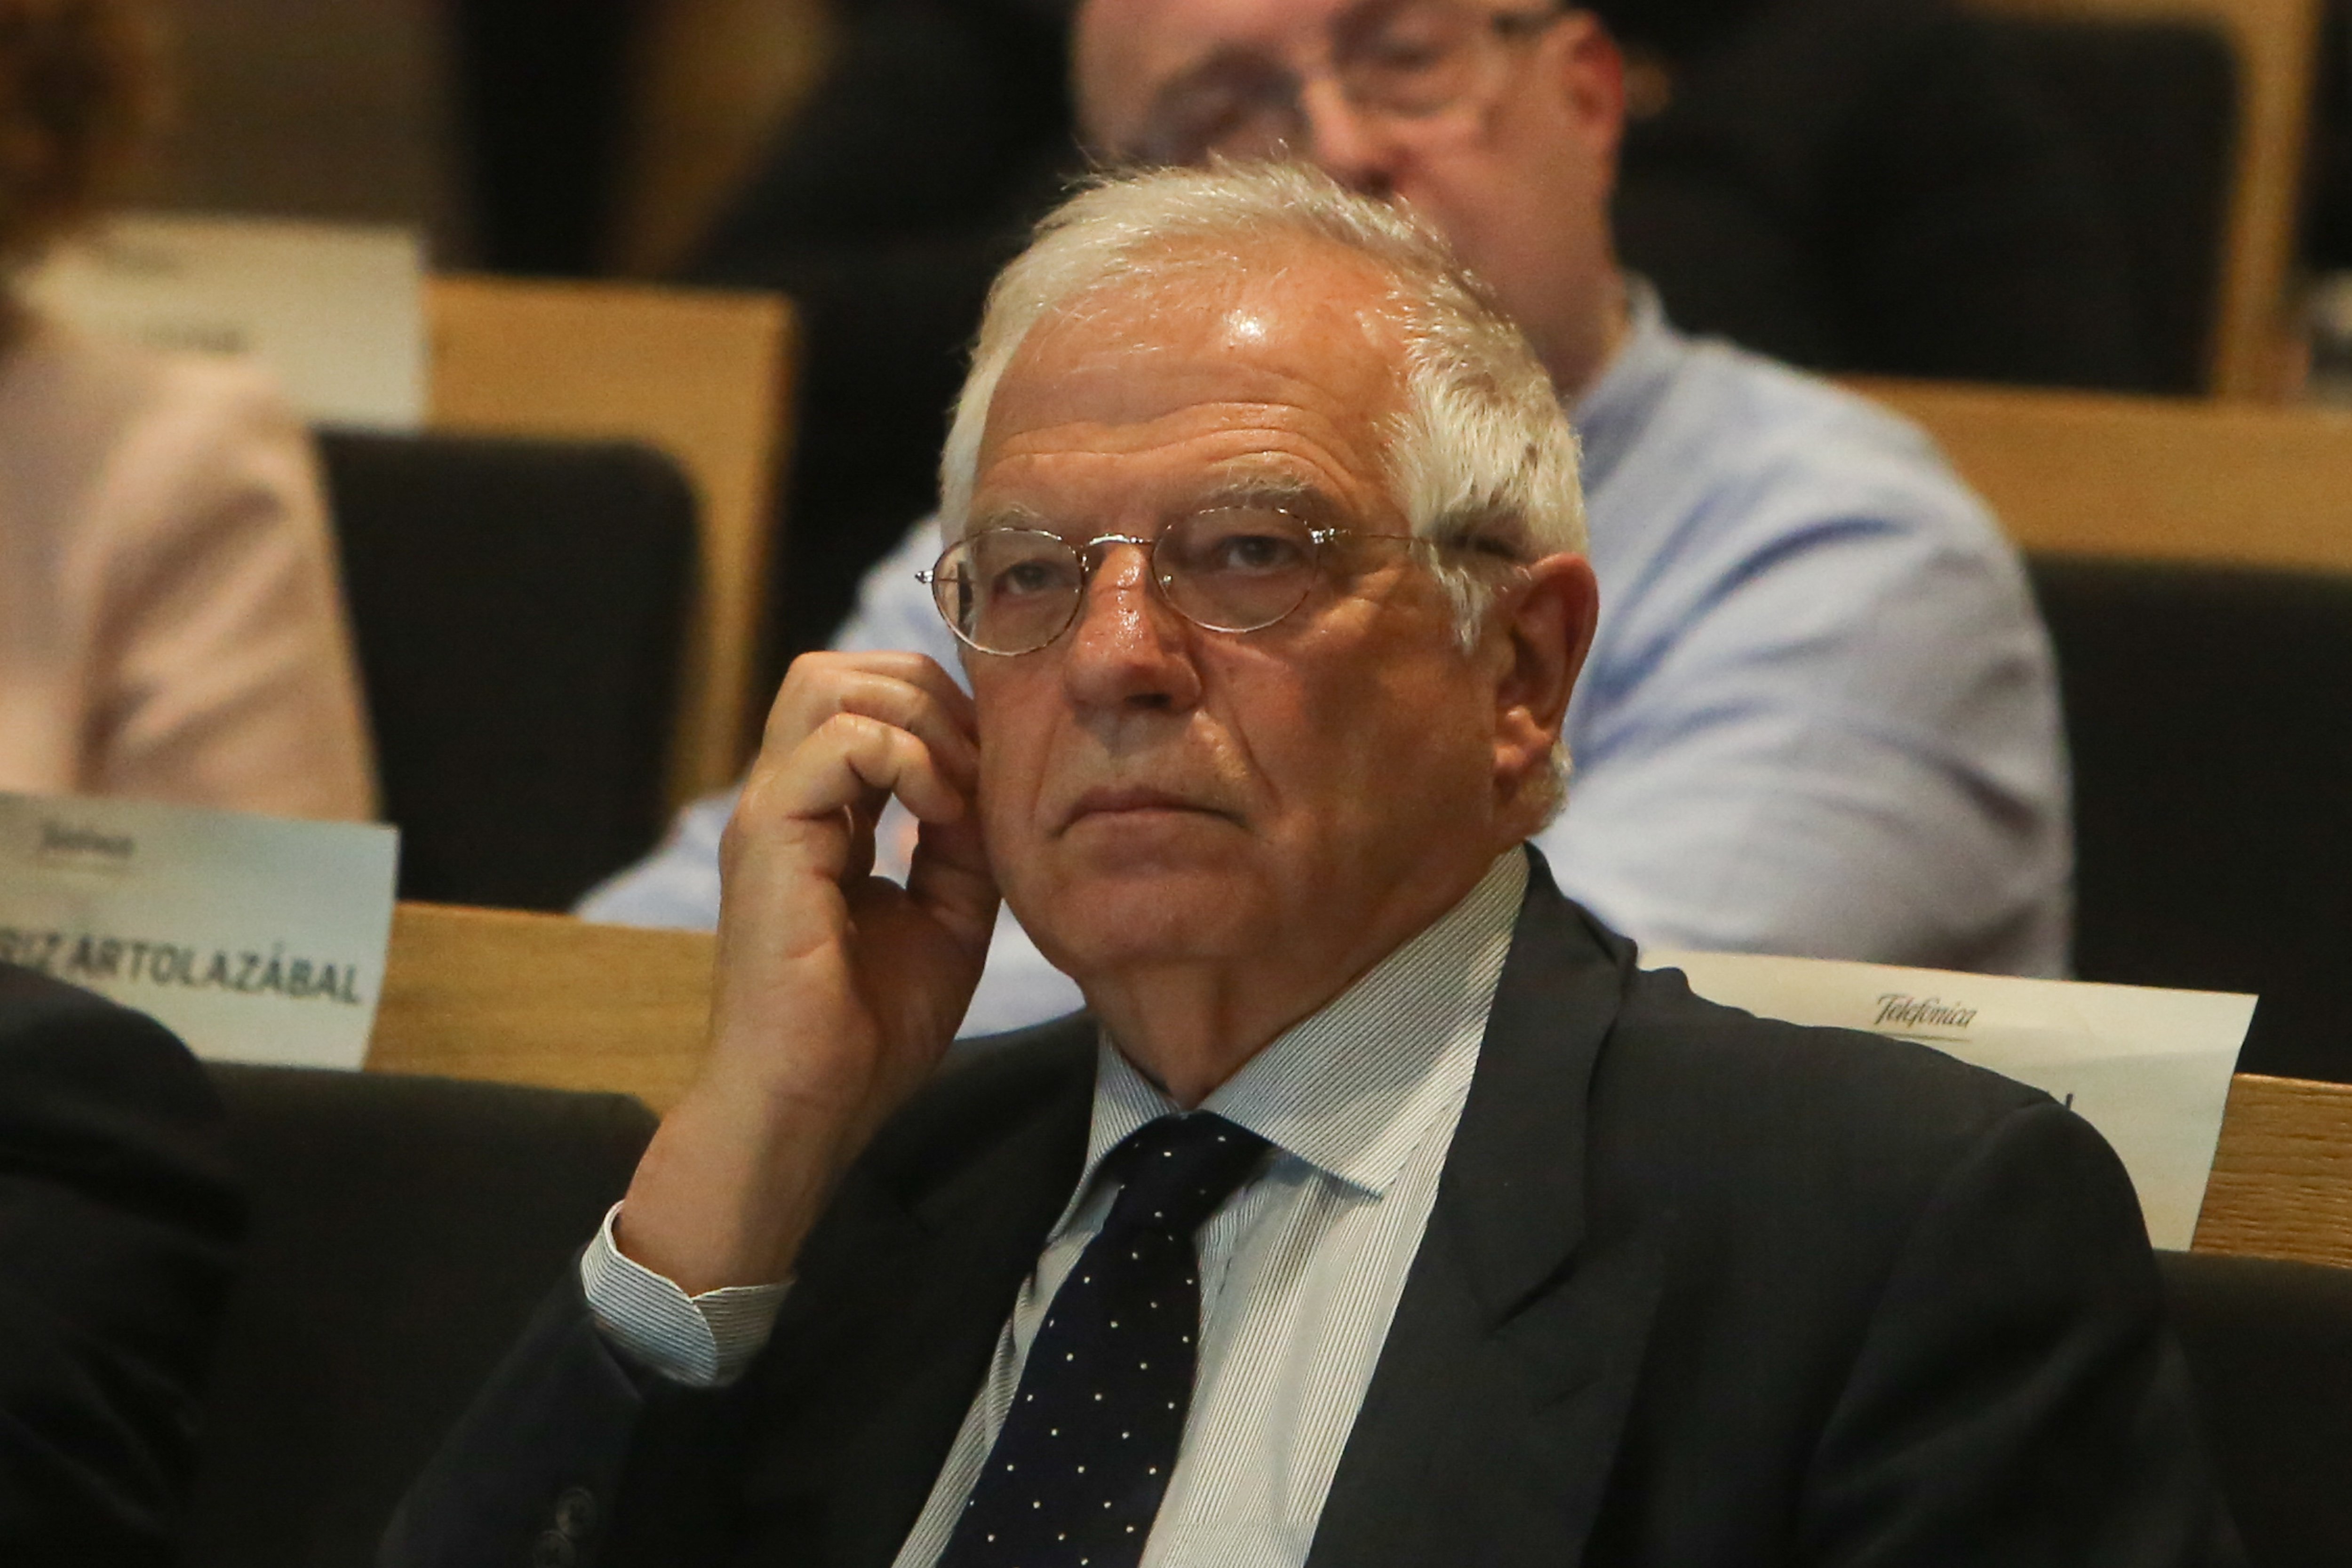 Spanish foreign minister Borrell walks out of interview when asked about Catalonia